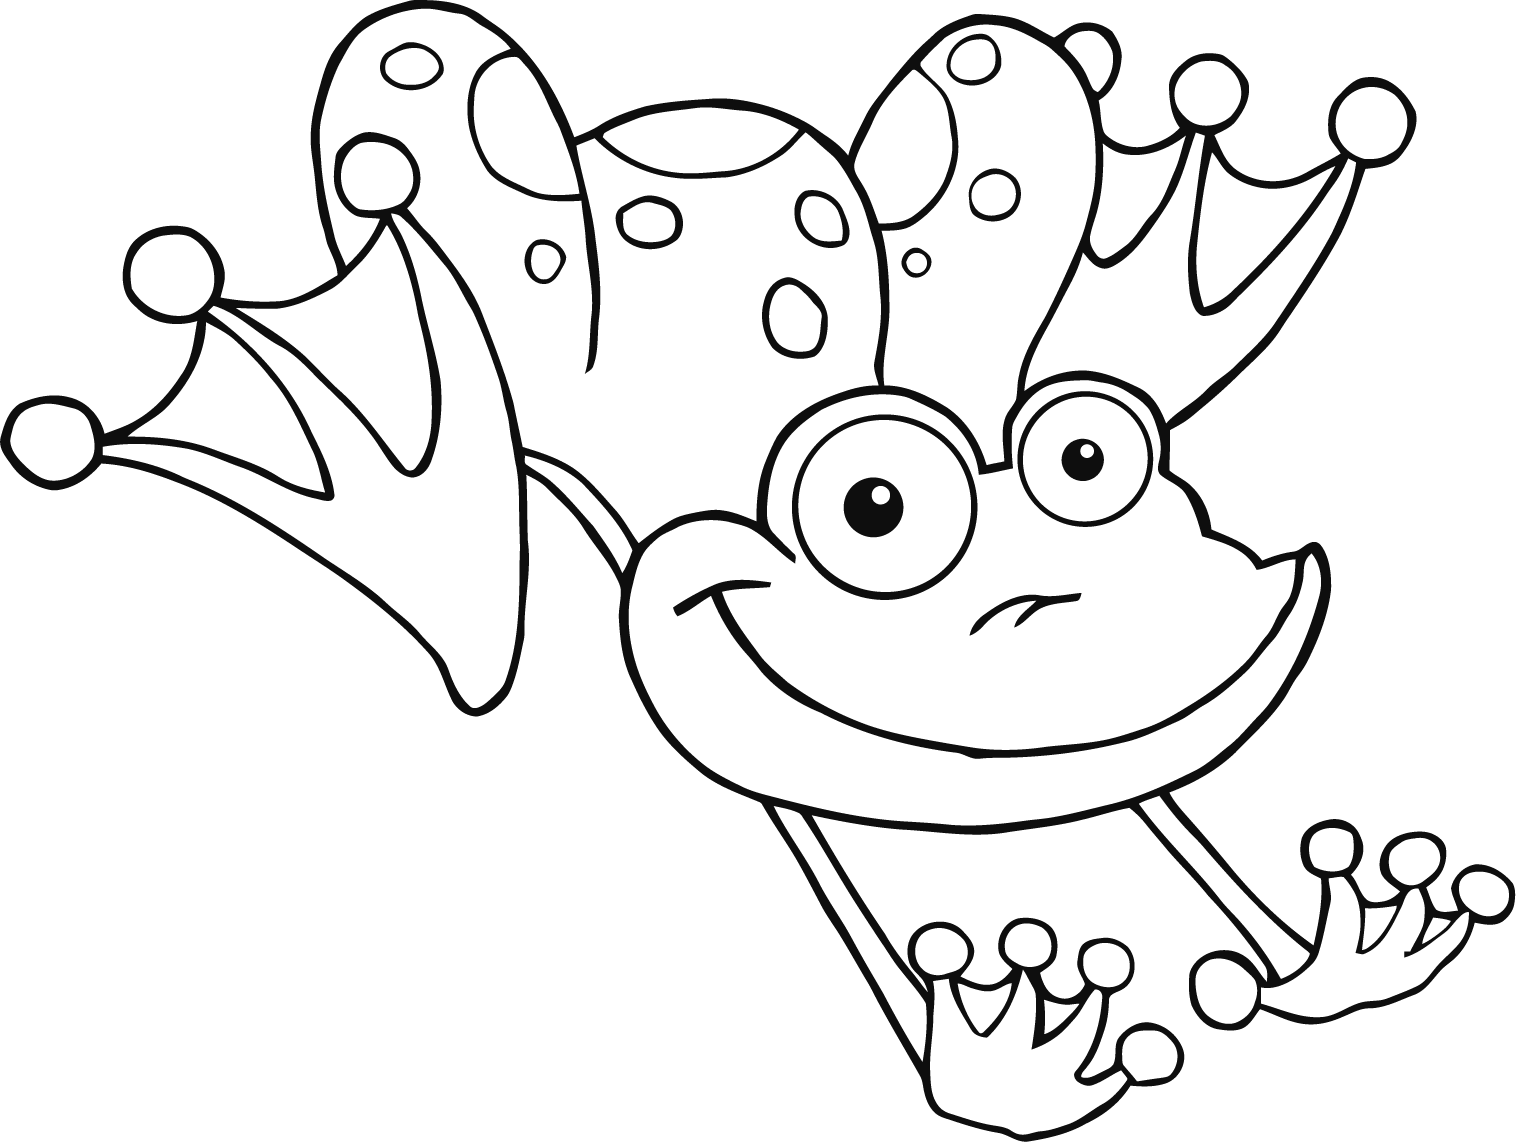 frogs coloring pages free printable frog coloring pages for kids frogs coloring pages 